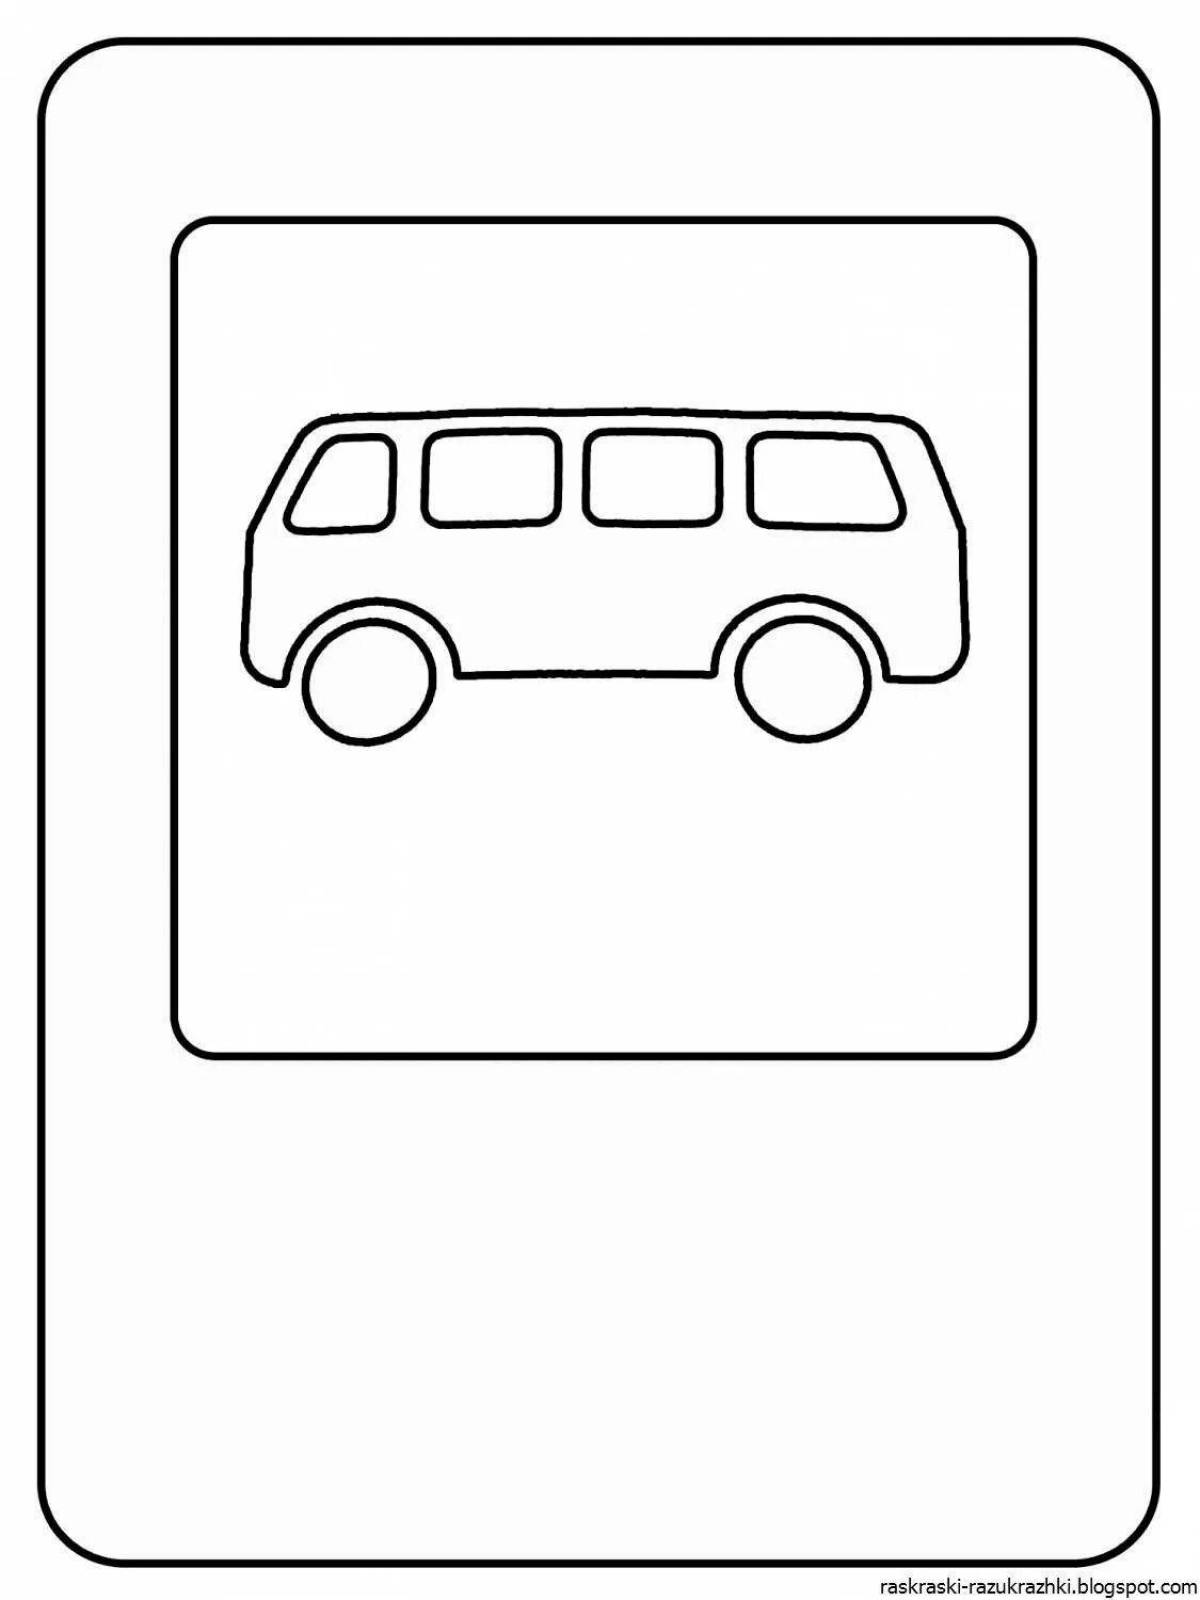 Magic road sign coloring page